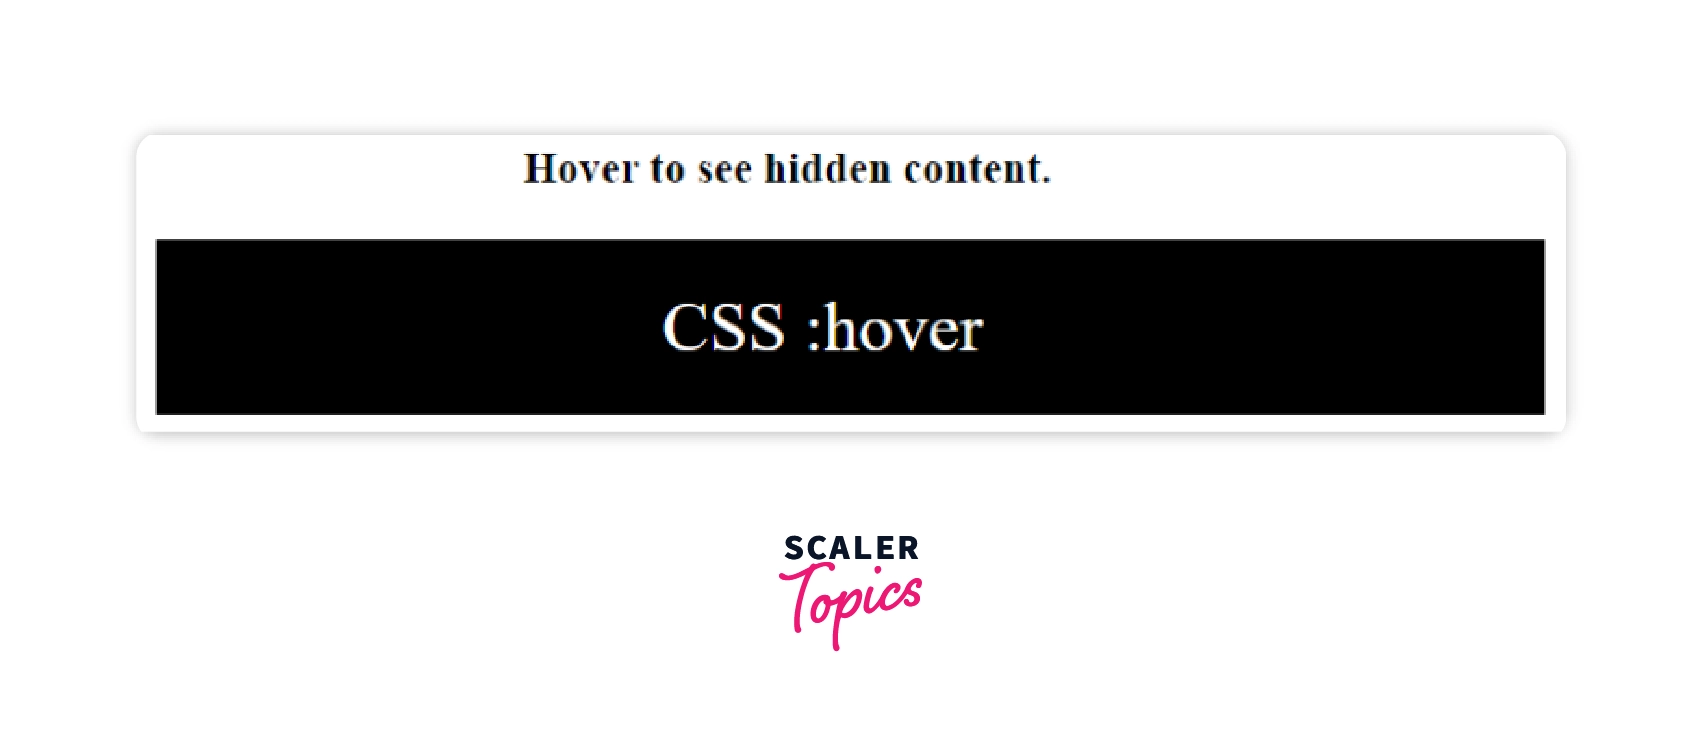 CSS hover